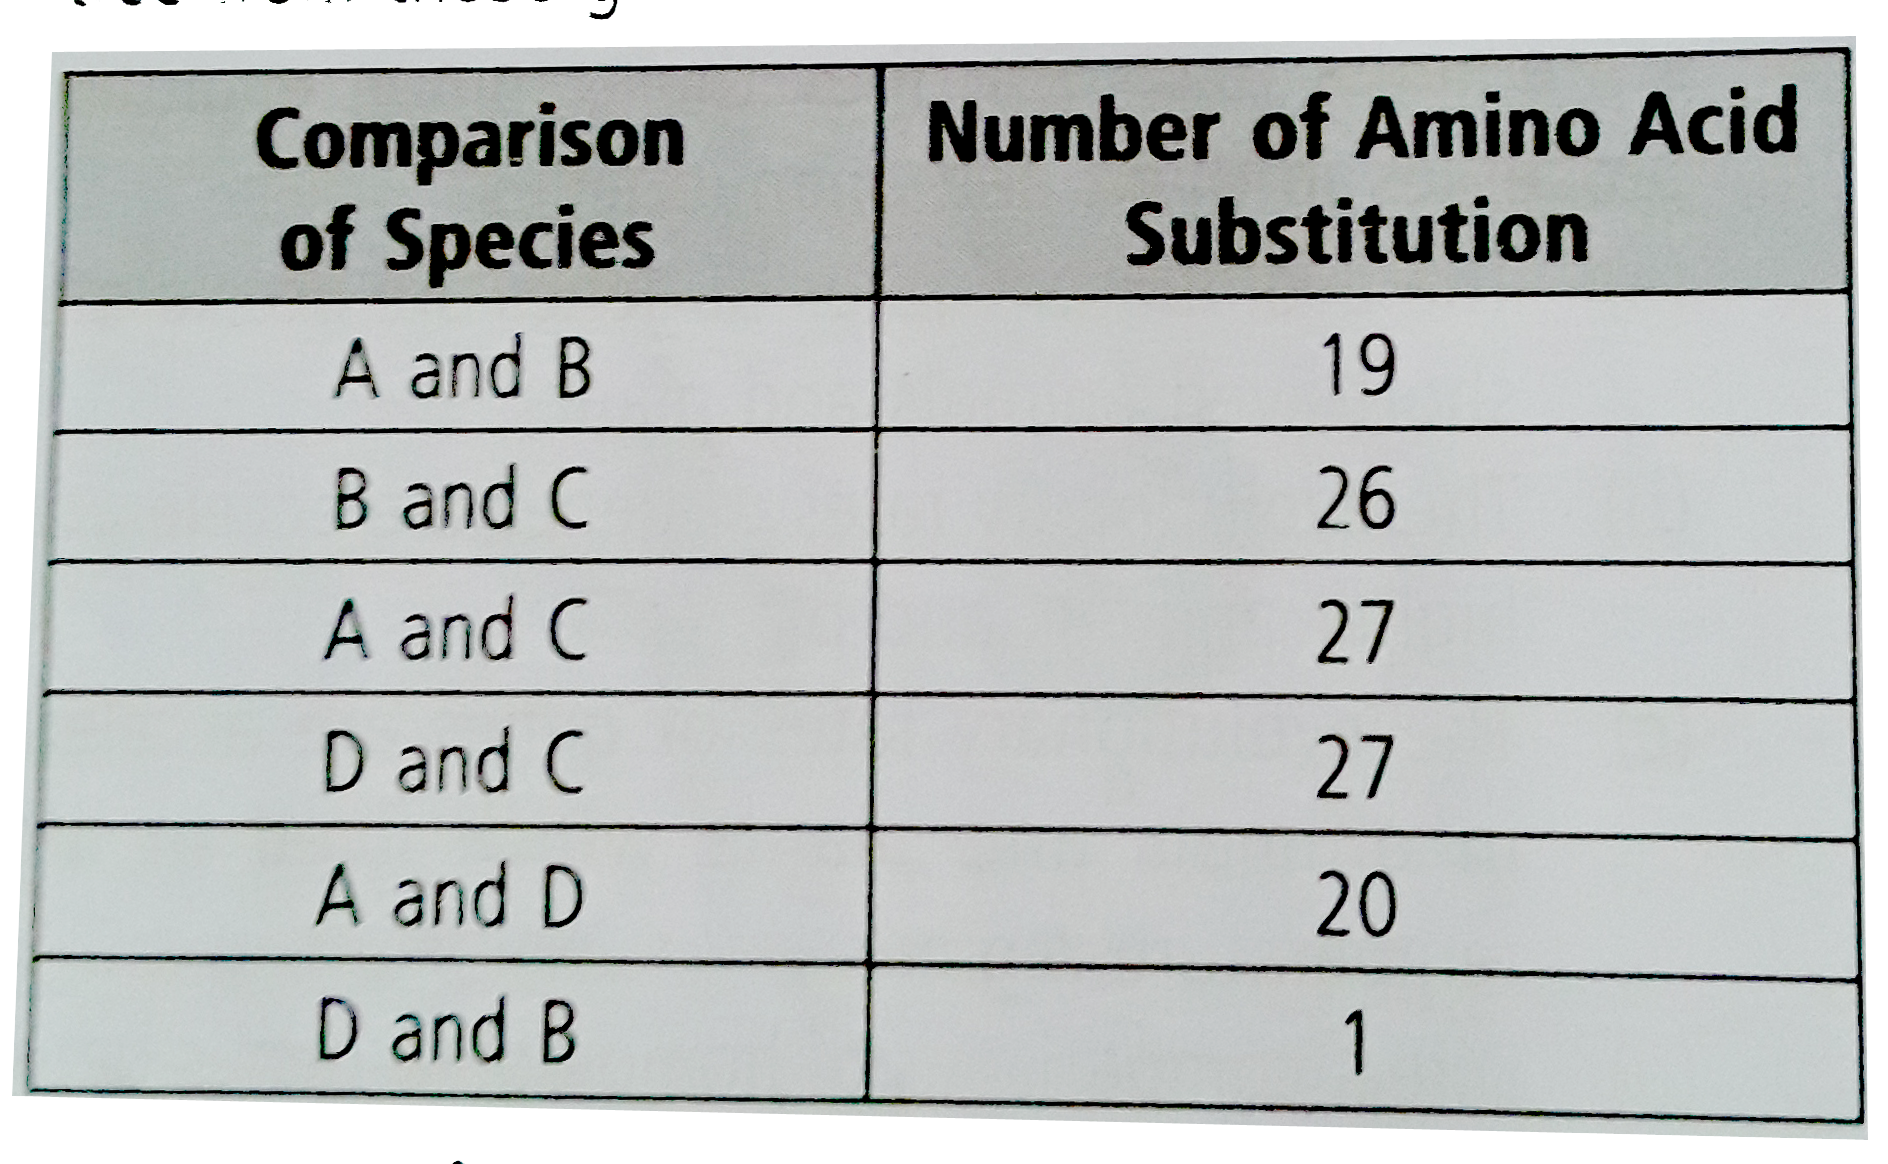 Following table shows data on amino acid substitution in the alpha chain of haemoglobin in four different mammalian species A,B,C and D on the basis of the data shown in the table. Choose the most appropriate evolutionary tree from those given below.